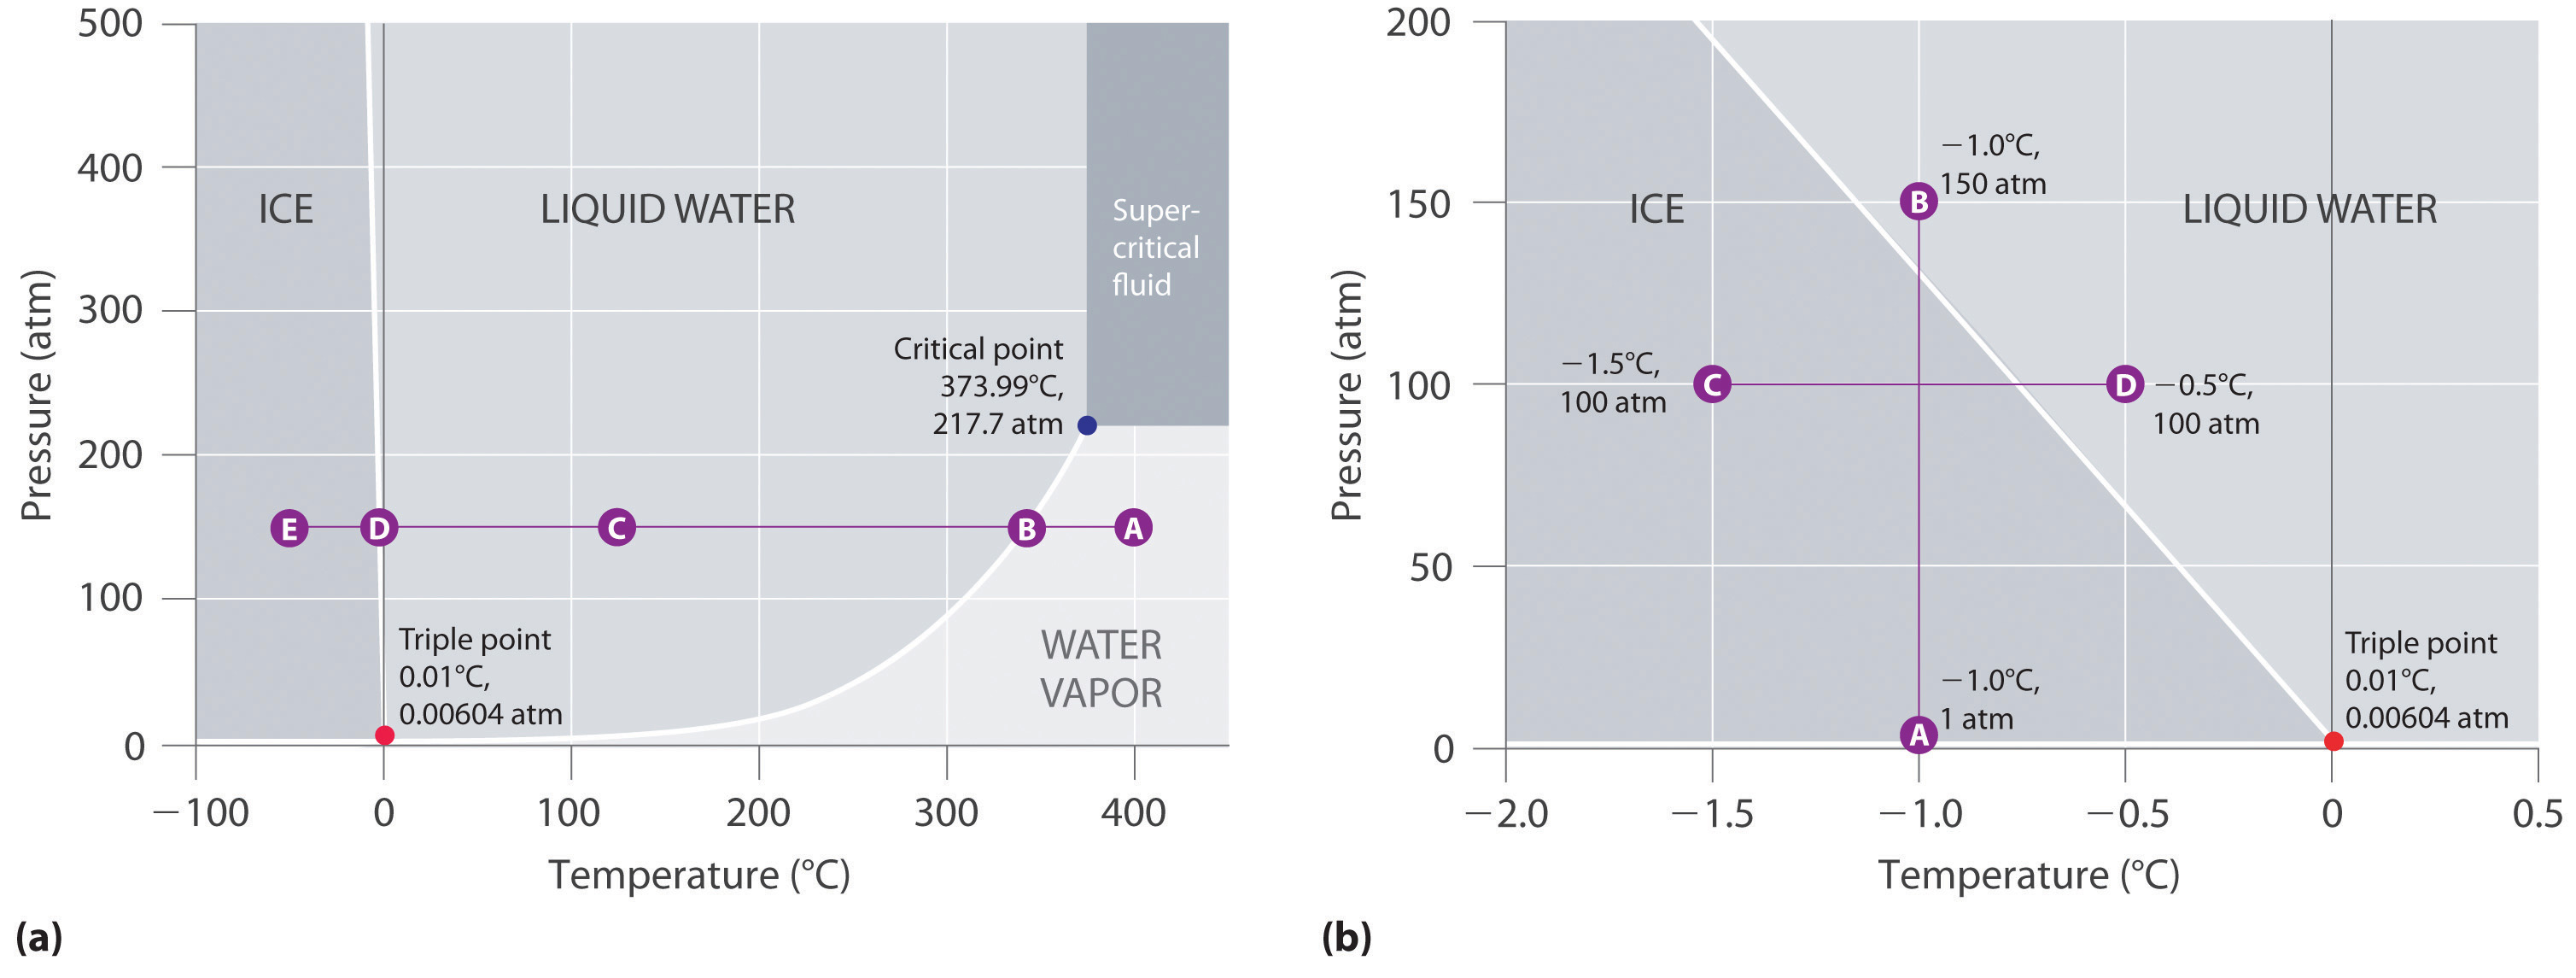 Complete phase diagram for potato (with nucleation points for ice